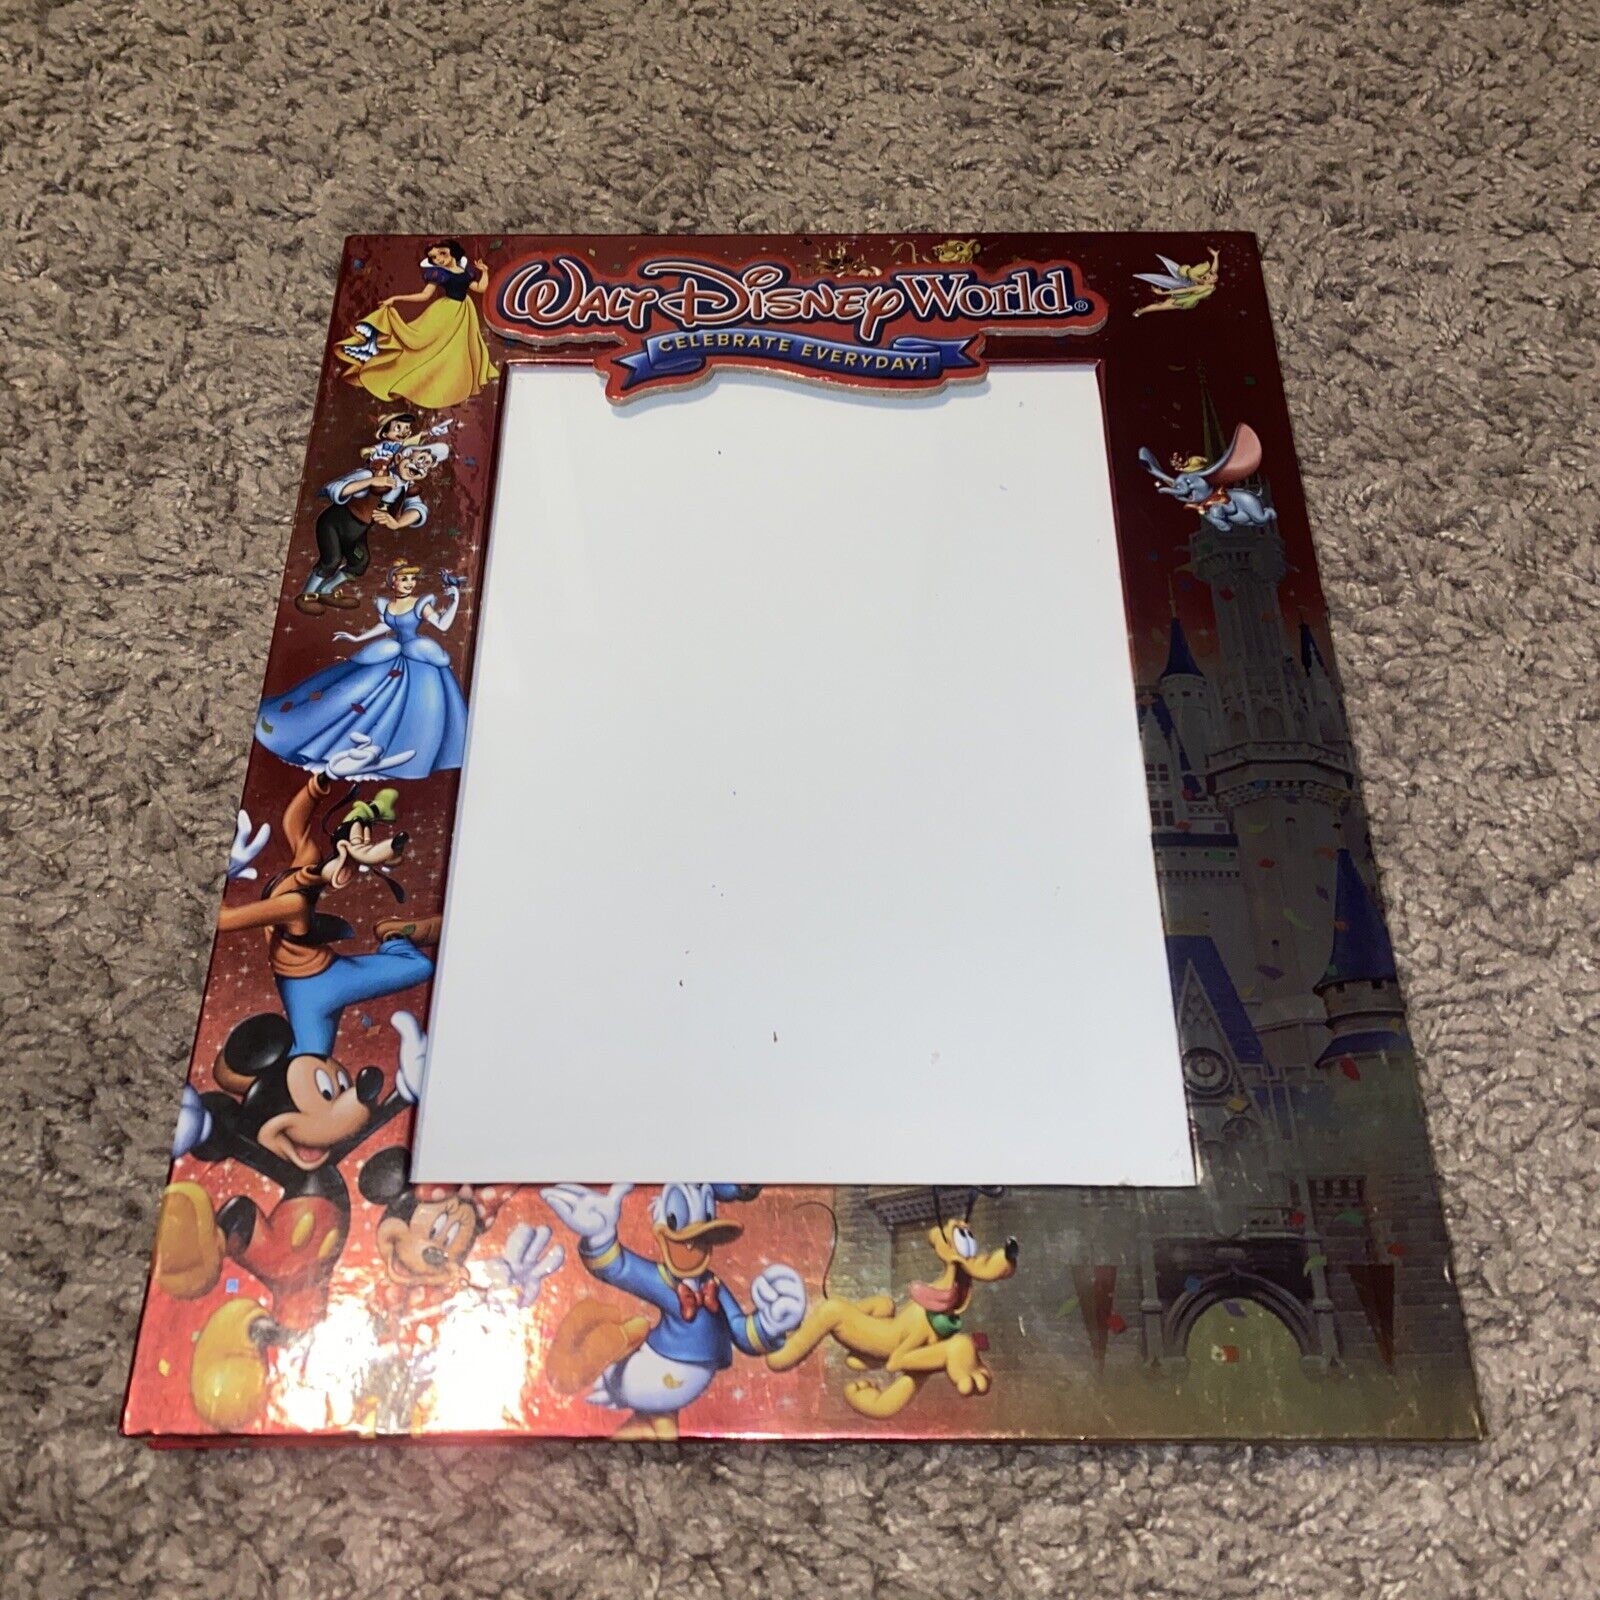 Walt Disney World Celebrate Everyday 5X7 inch Picture Frame SEE GREAT